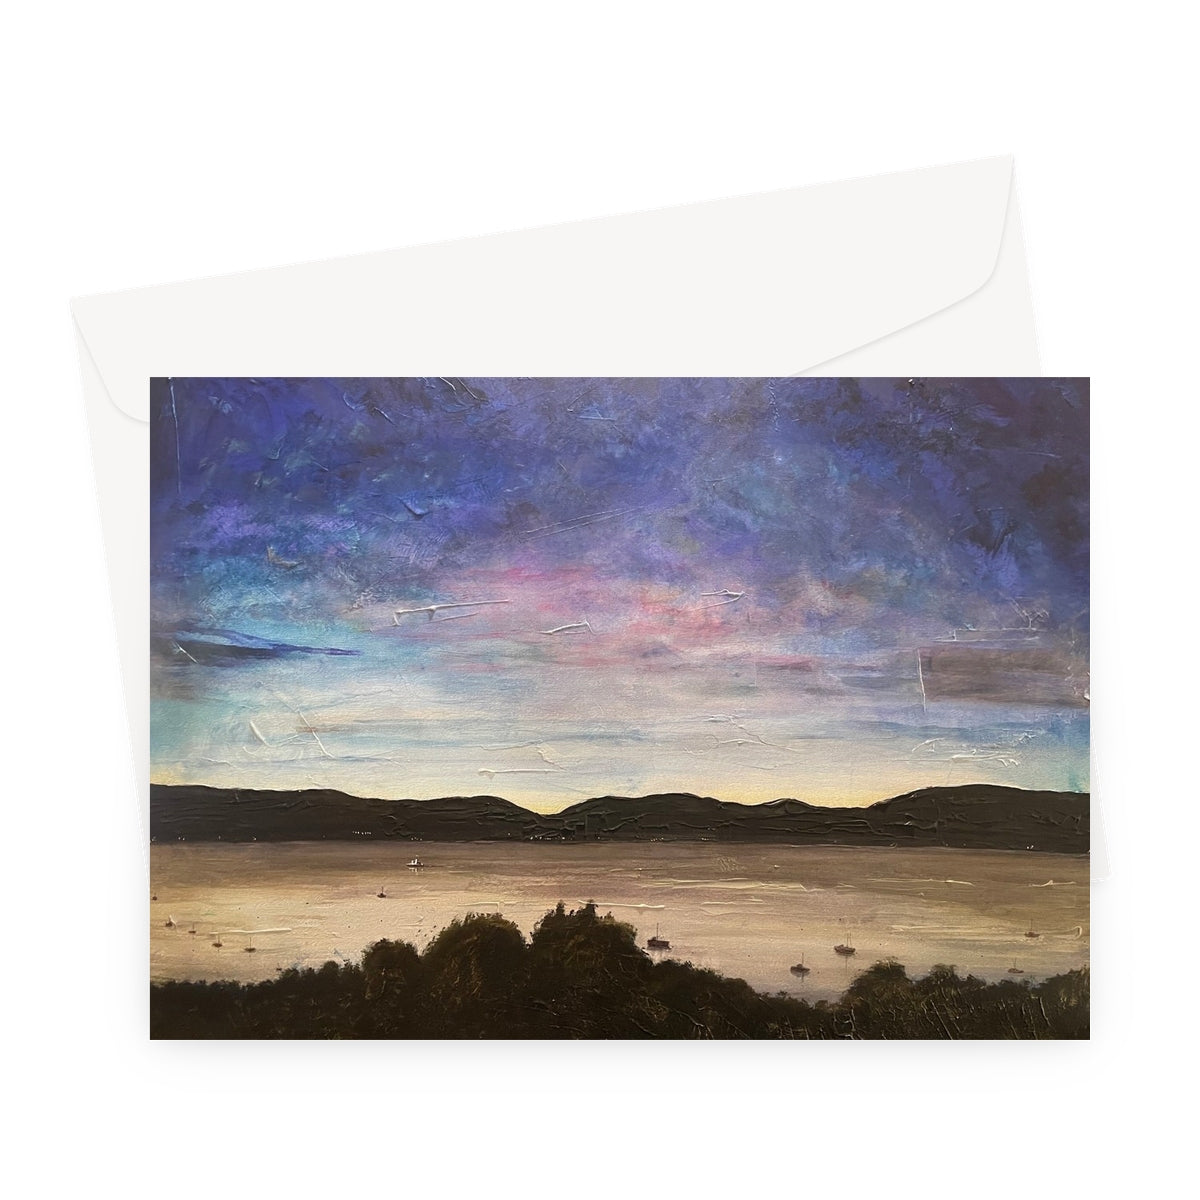 River Clyde Twilight Art Gifts Greeting Card-Greetings Cards-River Clyde Art Gallery-A5 Landscape-1 Card-Paintings, Prints, Homeware, Art Gifts From Scotland By Scottish Artist Kevin Hunter